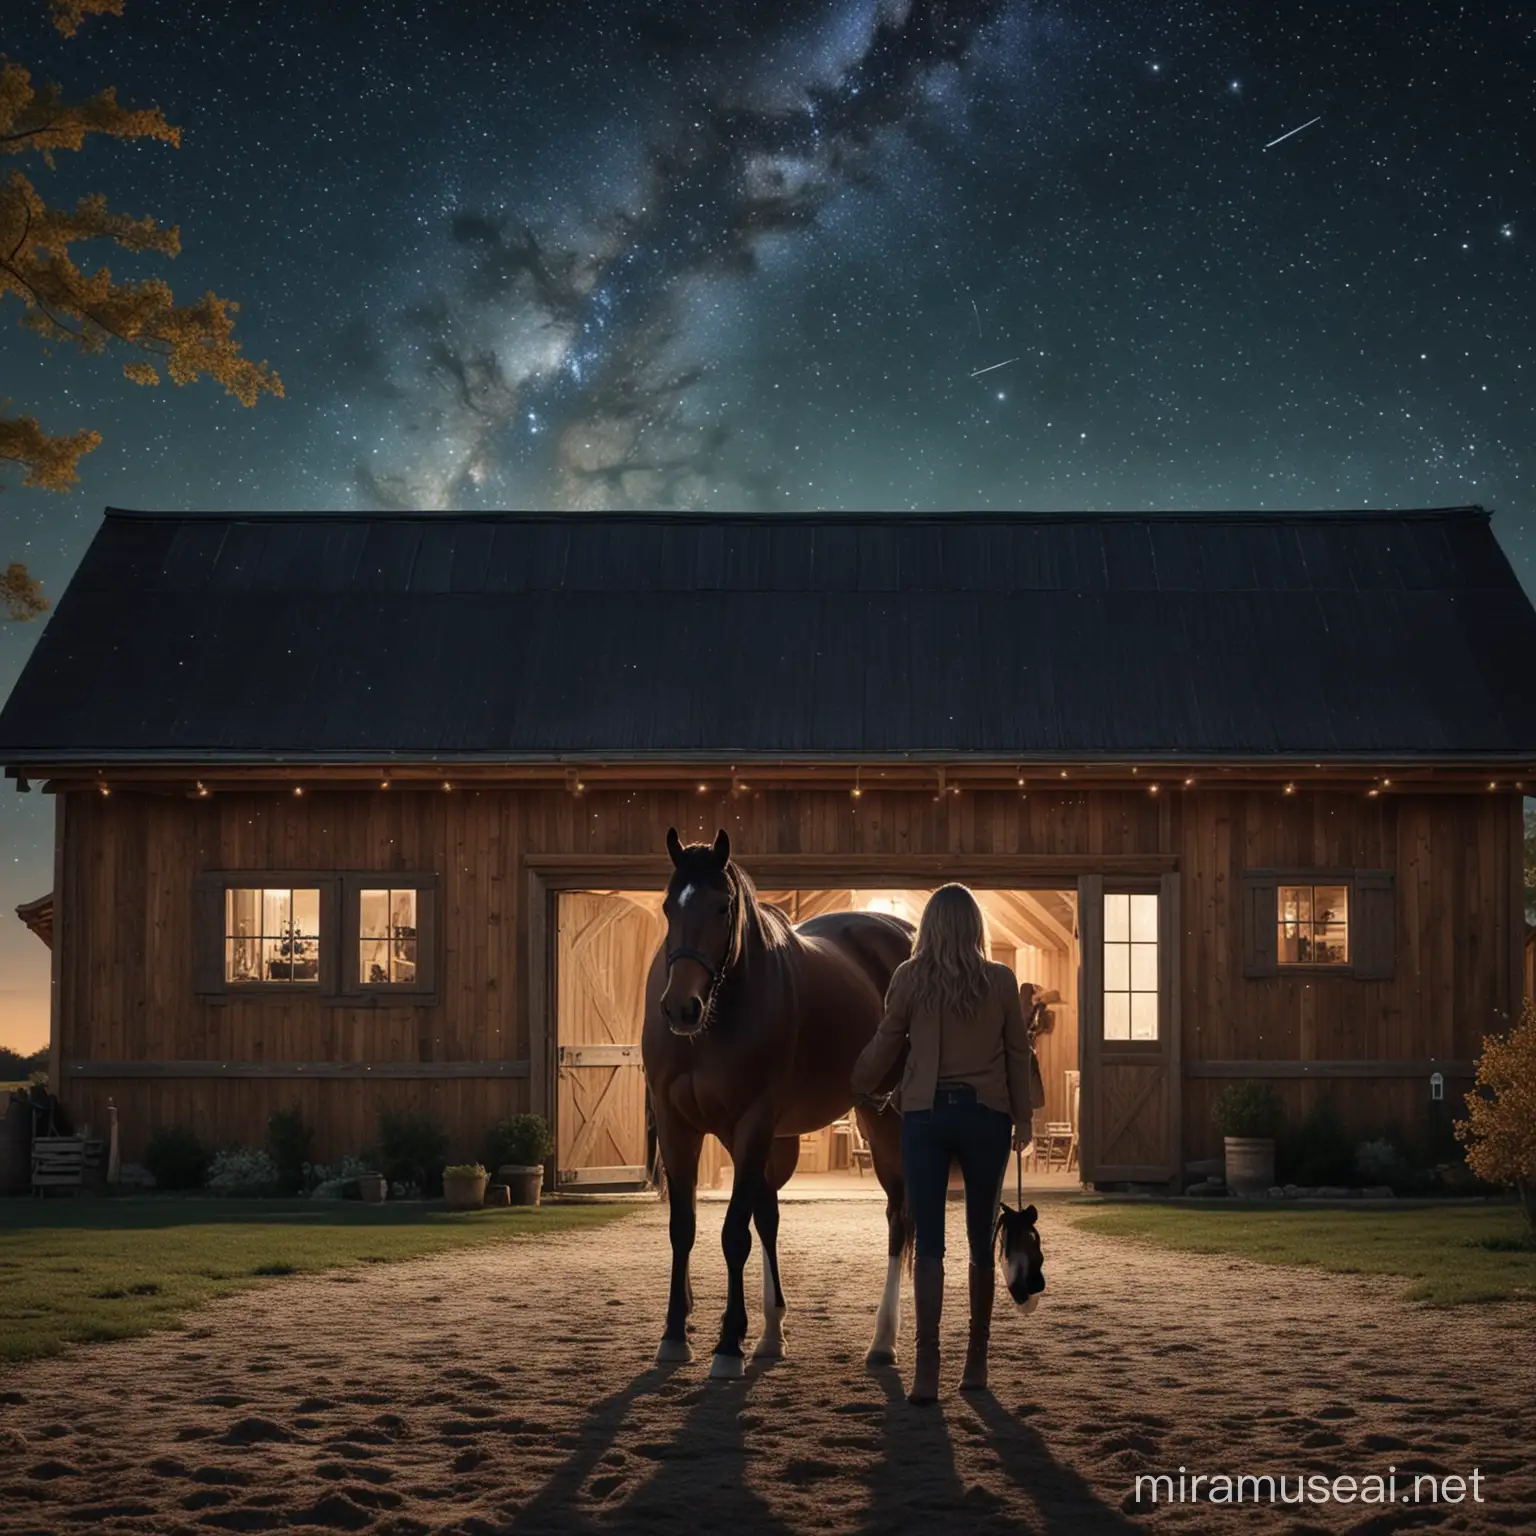 Luxurious Barn Night Rich Woman and Loyal Horse under a Magical Starry Sky